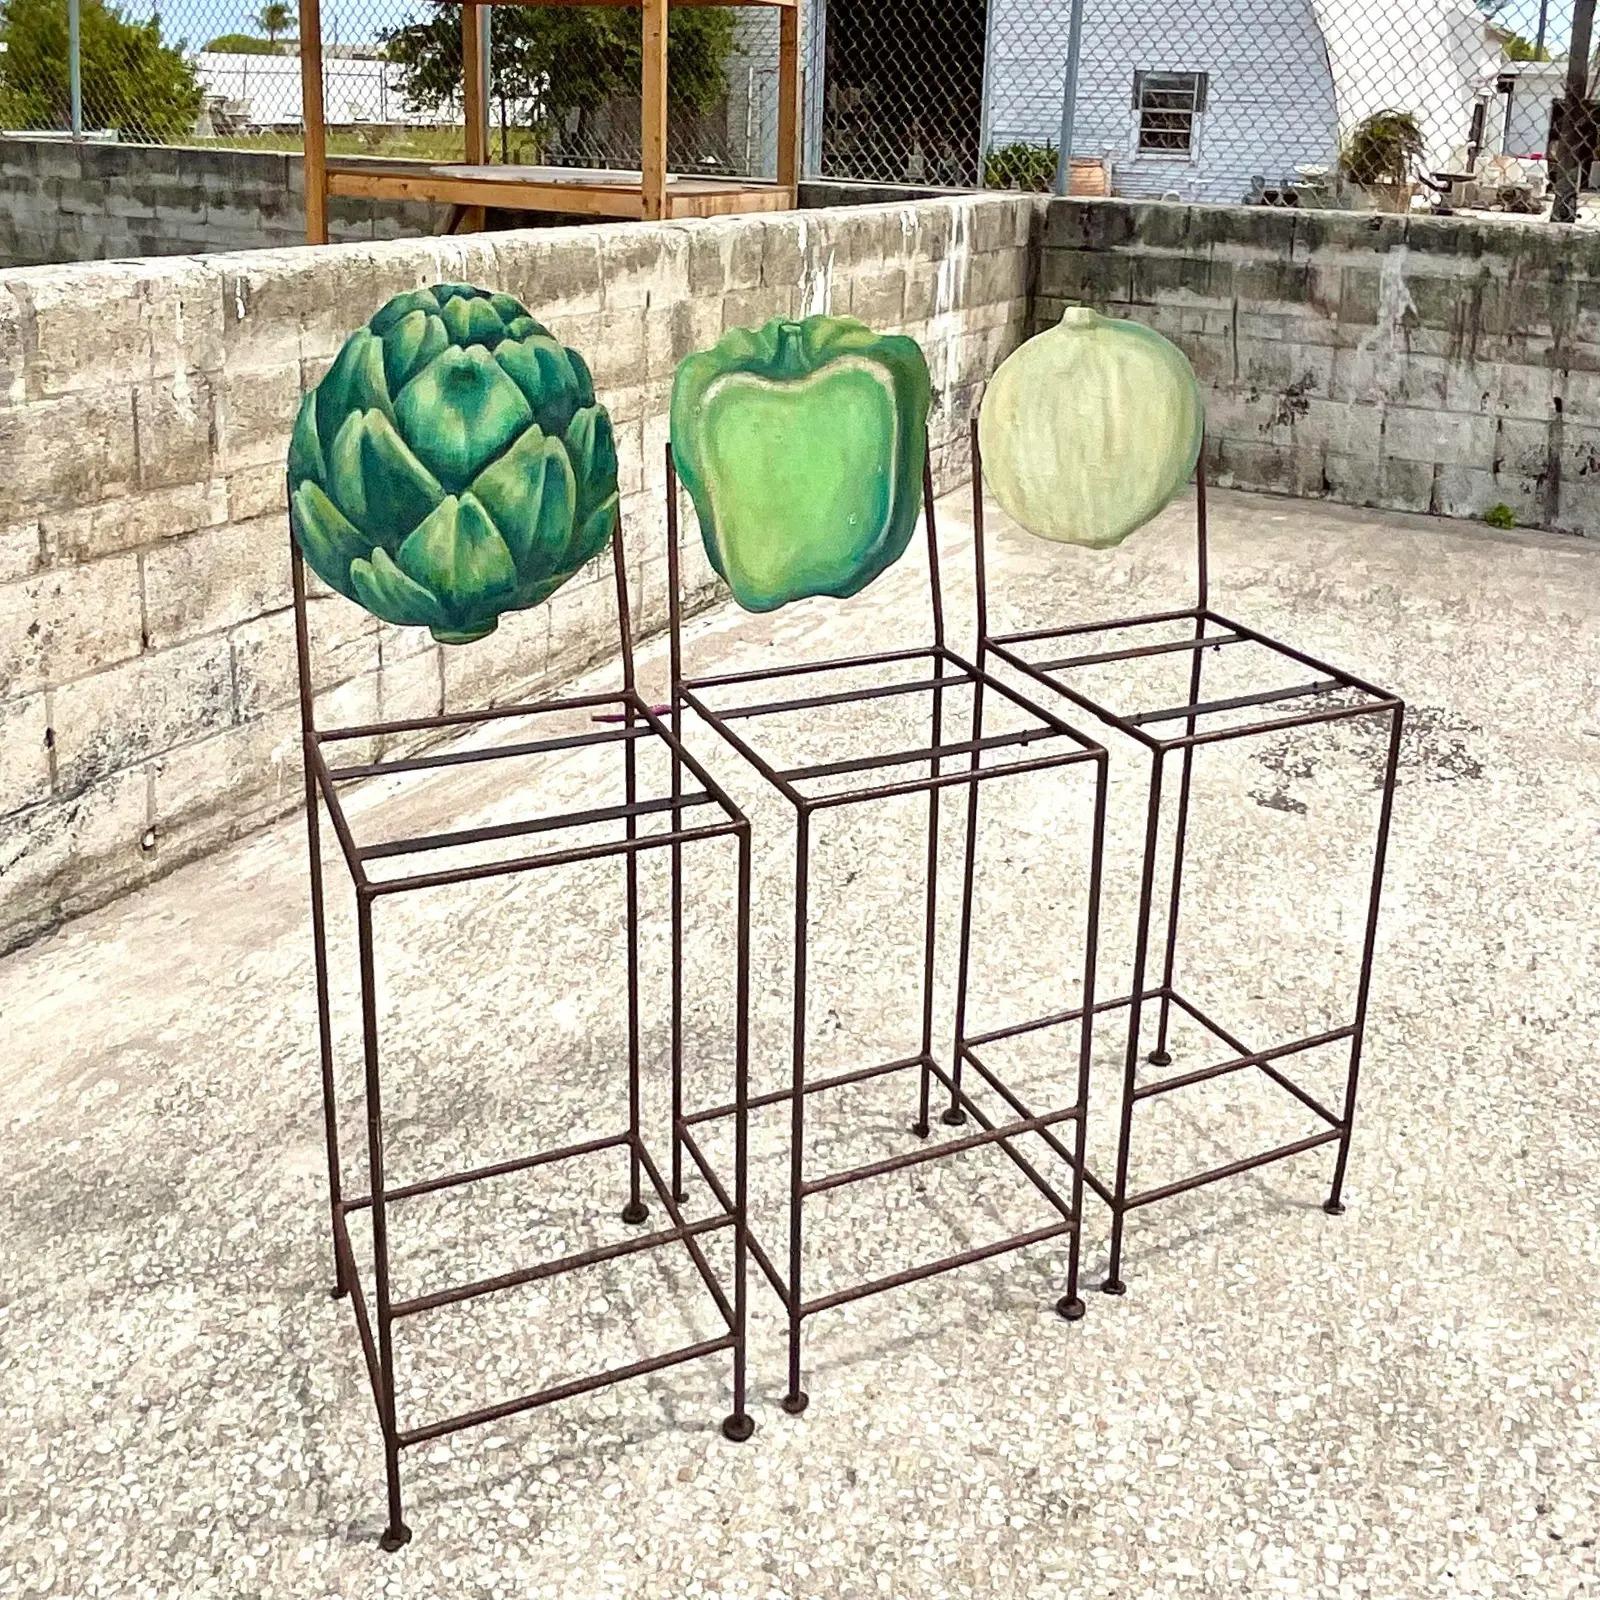 Fantastic set of three hand painted barstools. A charming collection of fresh vegetables serve as the back rest for three tall wrought iron seats. Acquired from a Palm Beach estate.